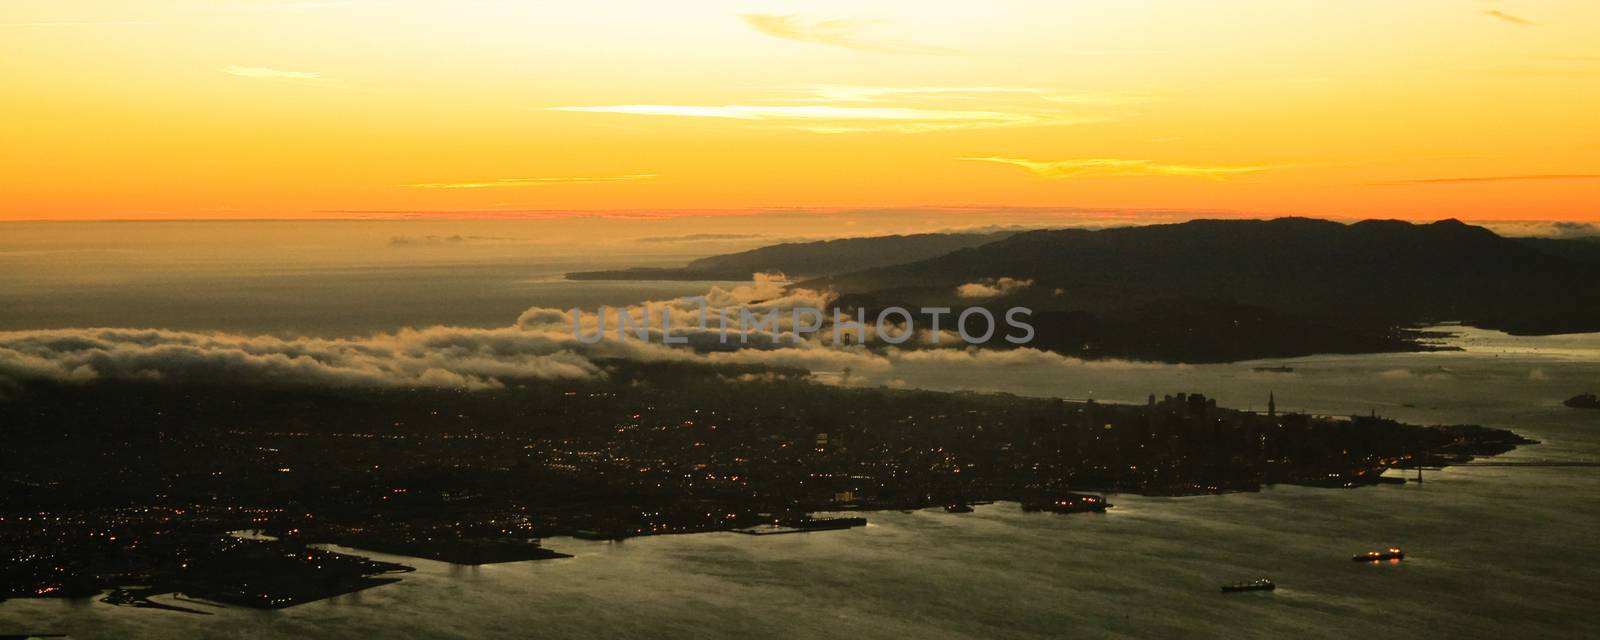 An aerial shot from the Golden Gate bridge and the San Francisco city at sunset.